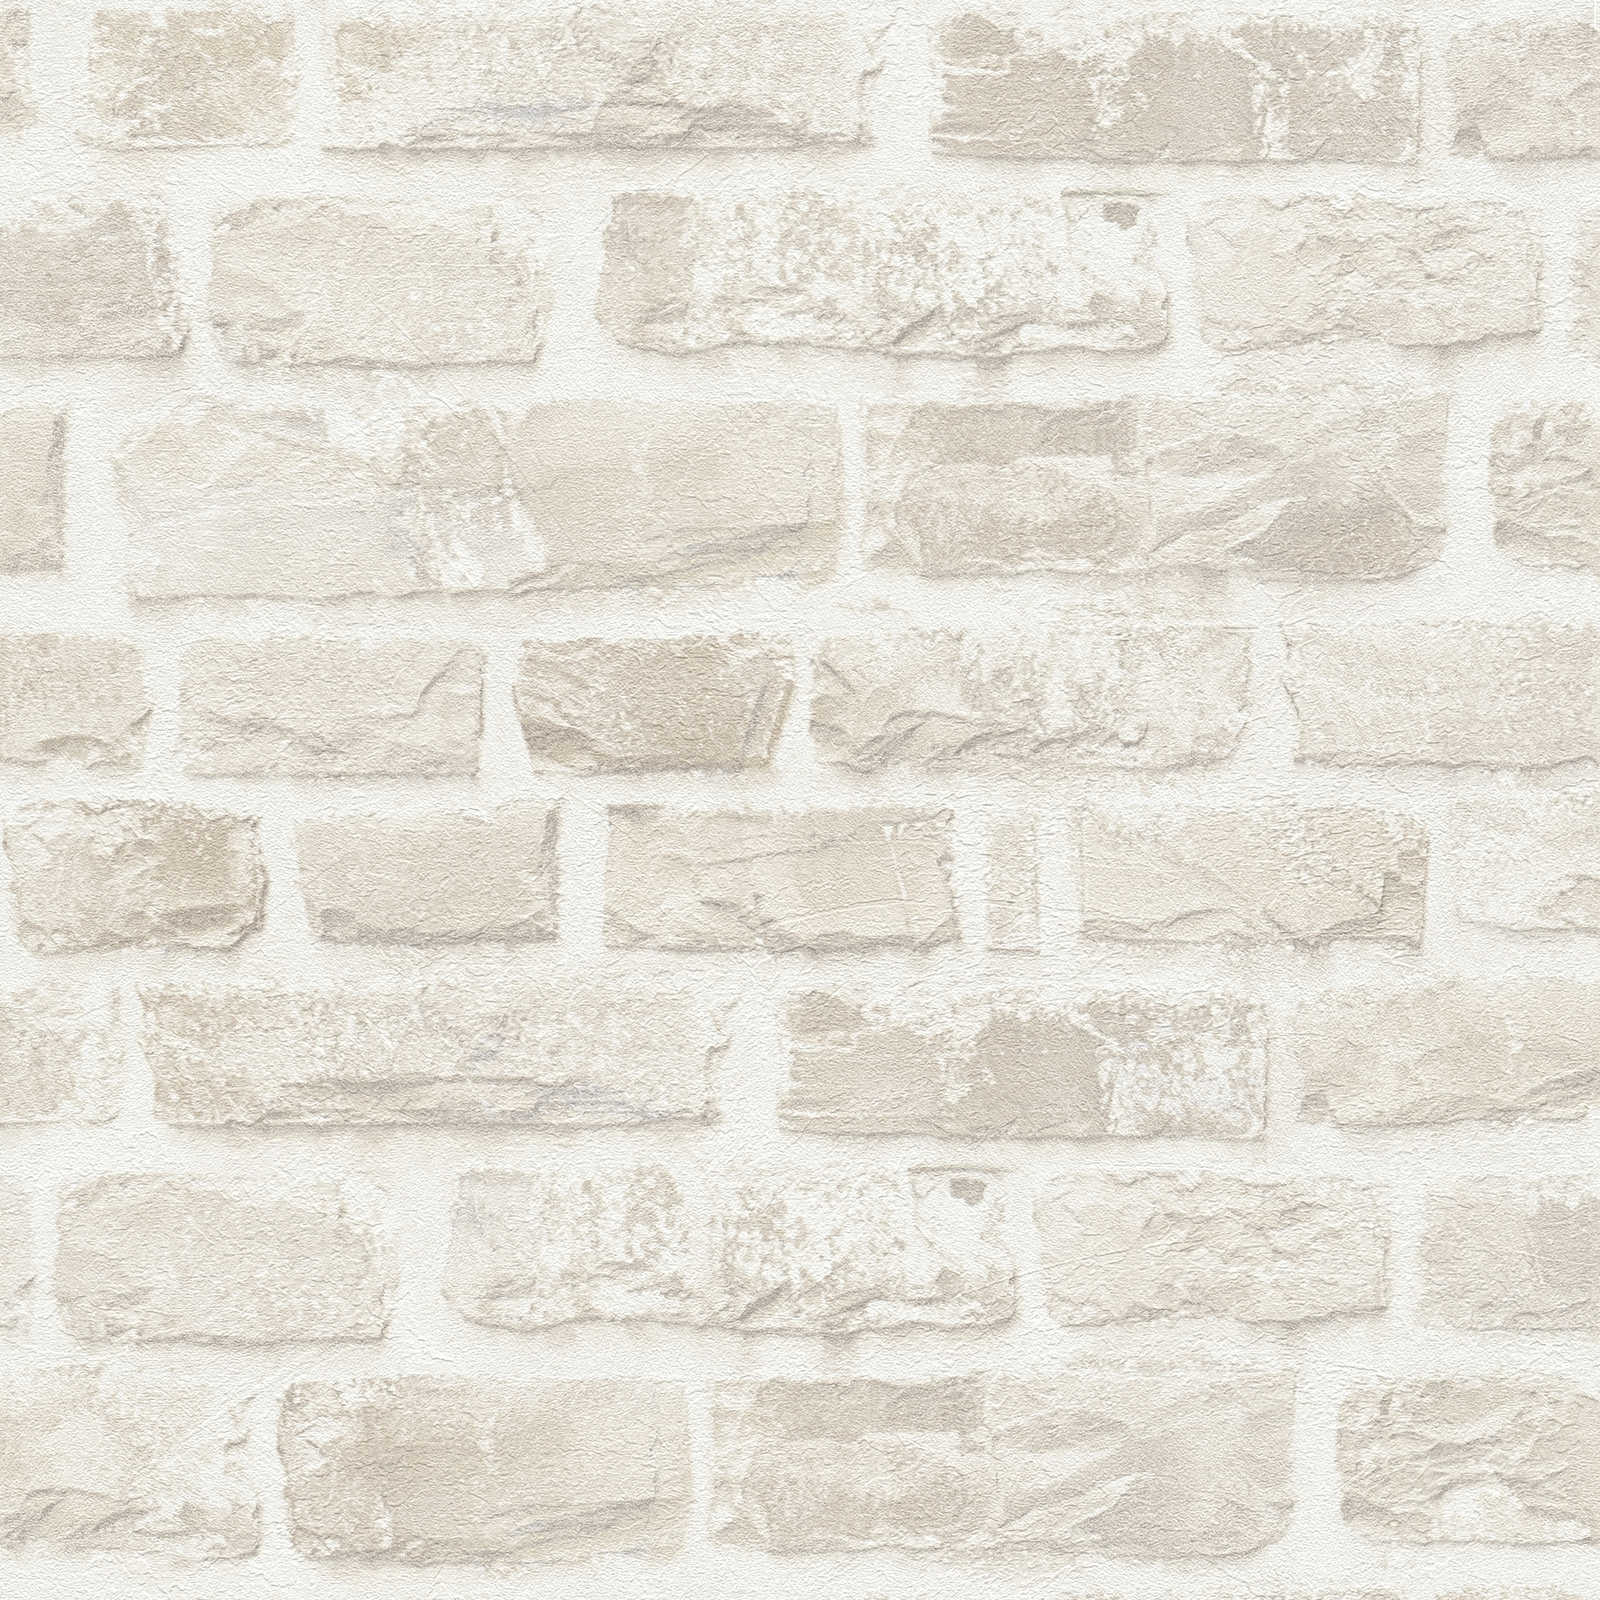         Non-woven wallpaper with stone look PVC-free - beige, white
    